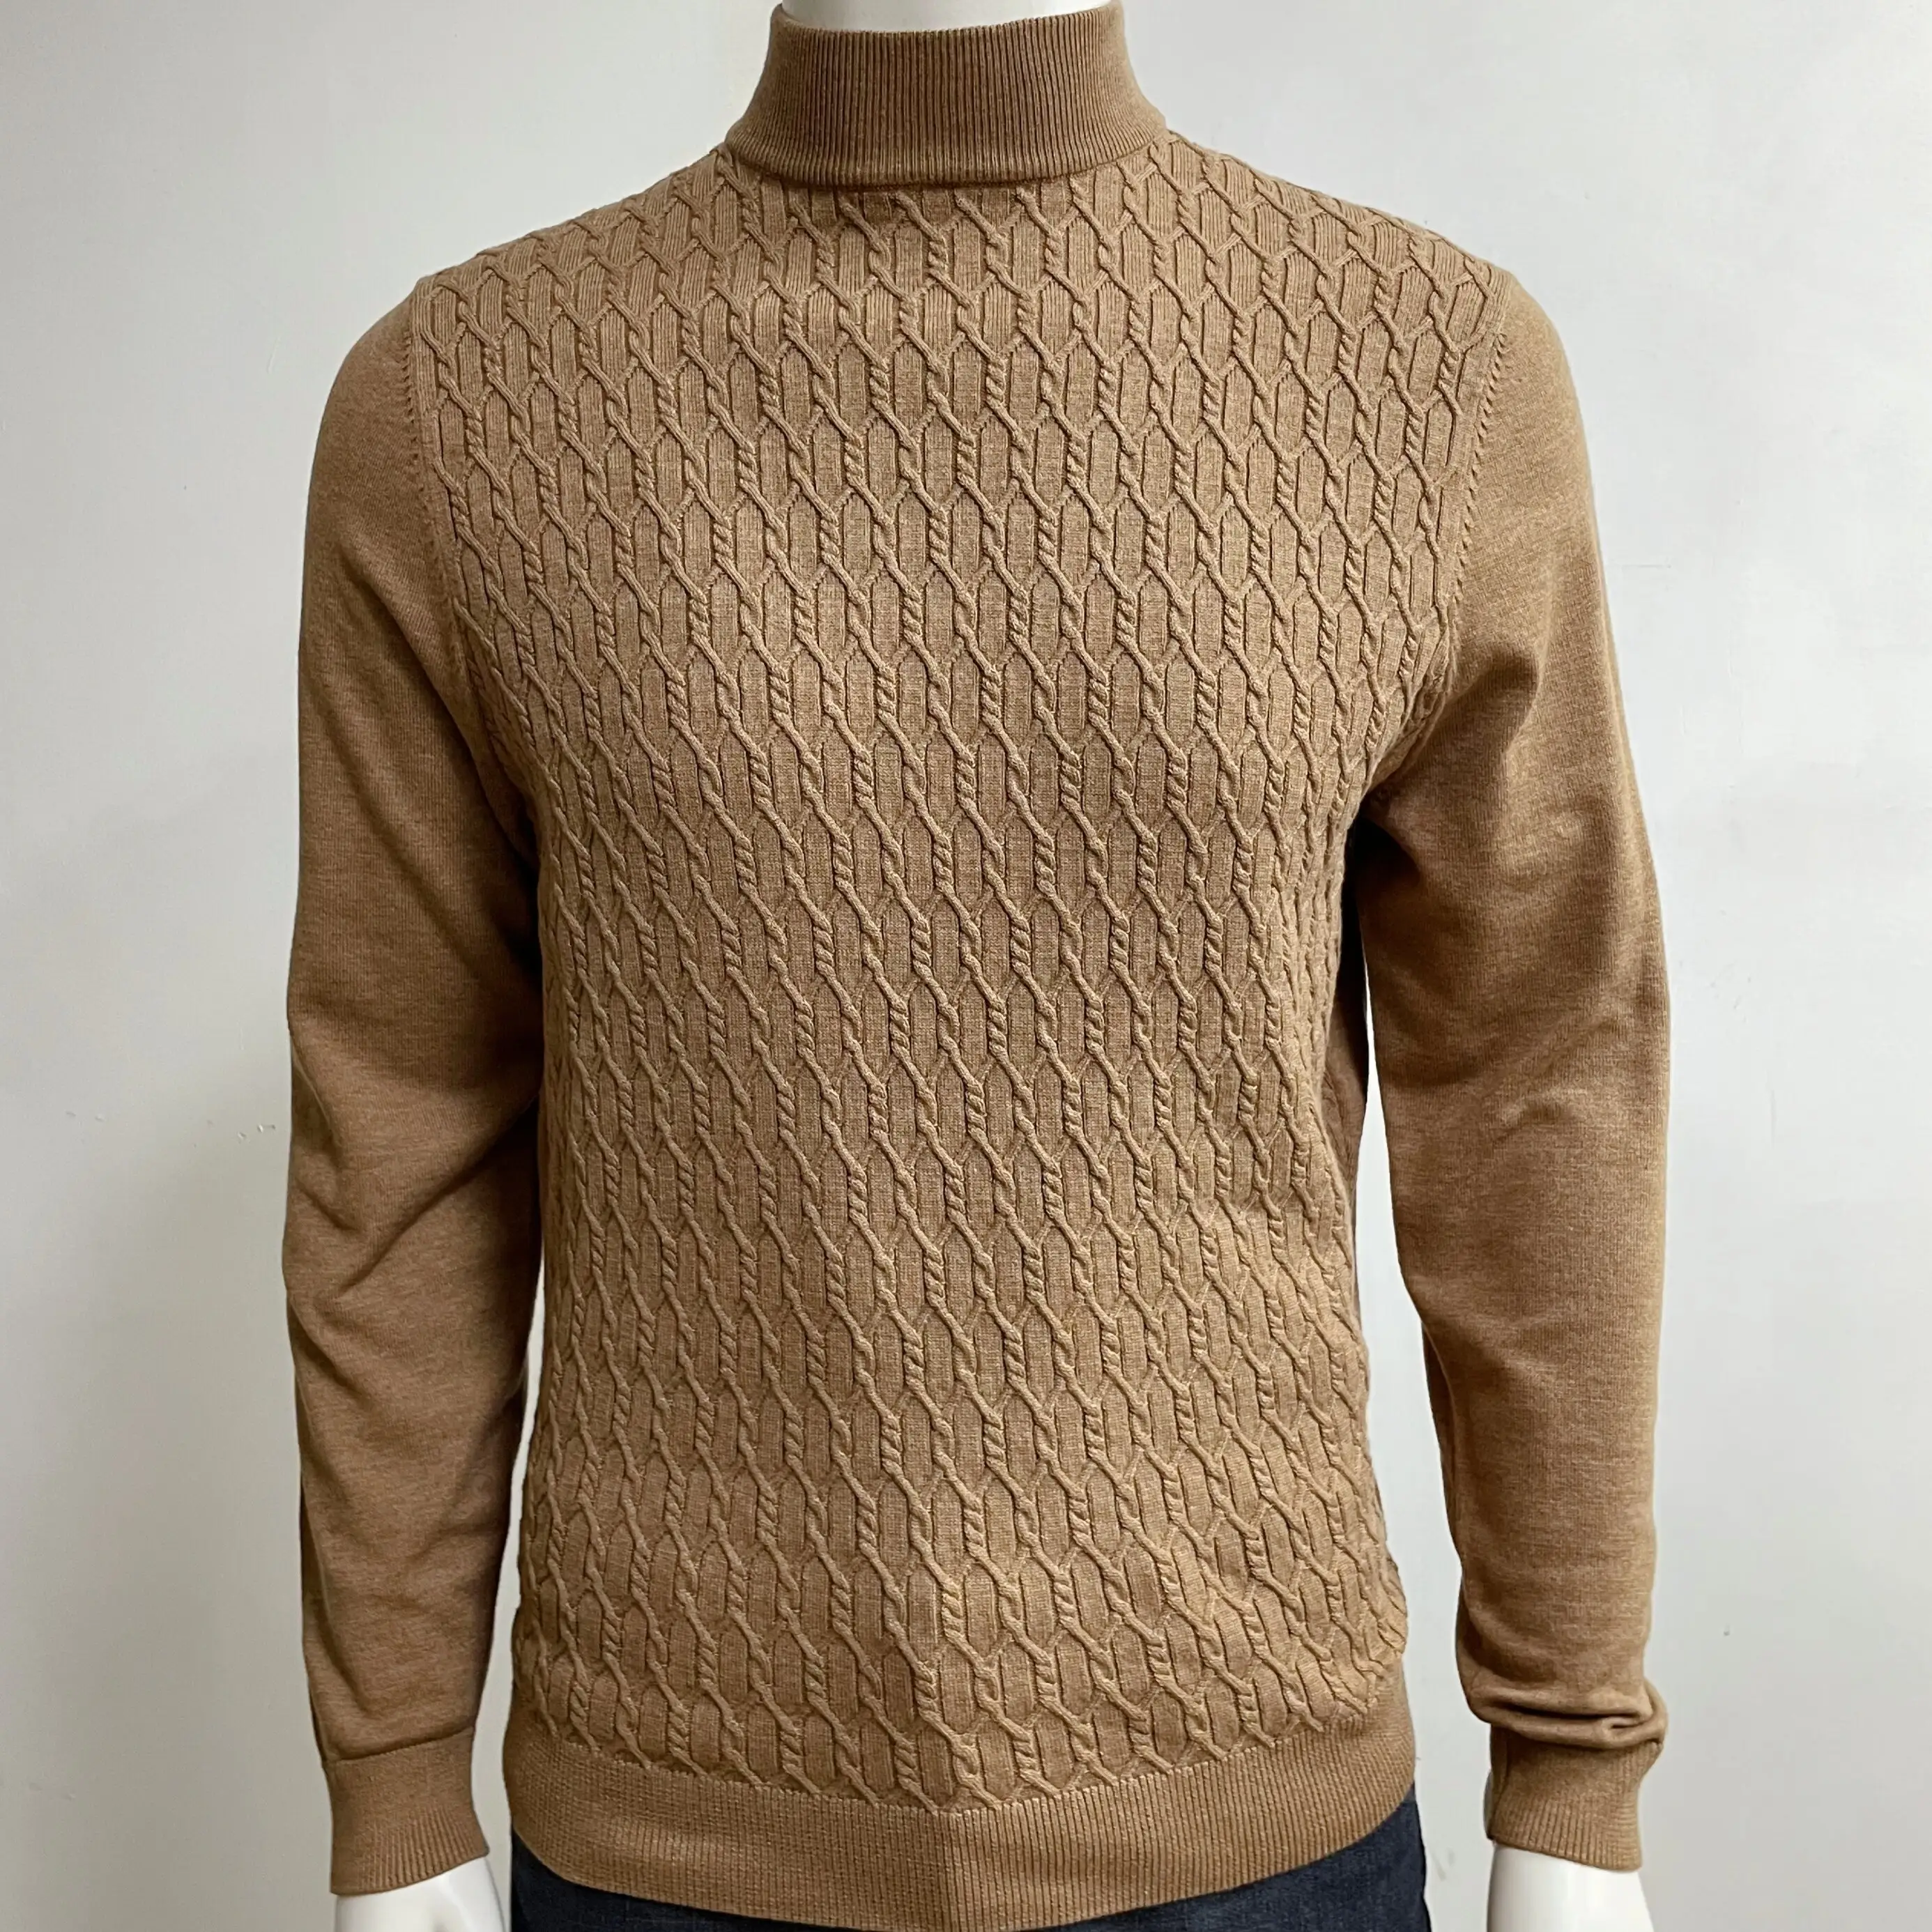 Style Men Clothes Fashion Knitted Honorable Collar Sweater Autumn and Winter Standard Turtleneck Sweater Norwegian Sweater